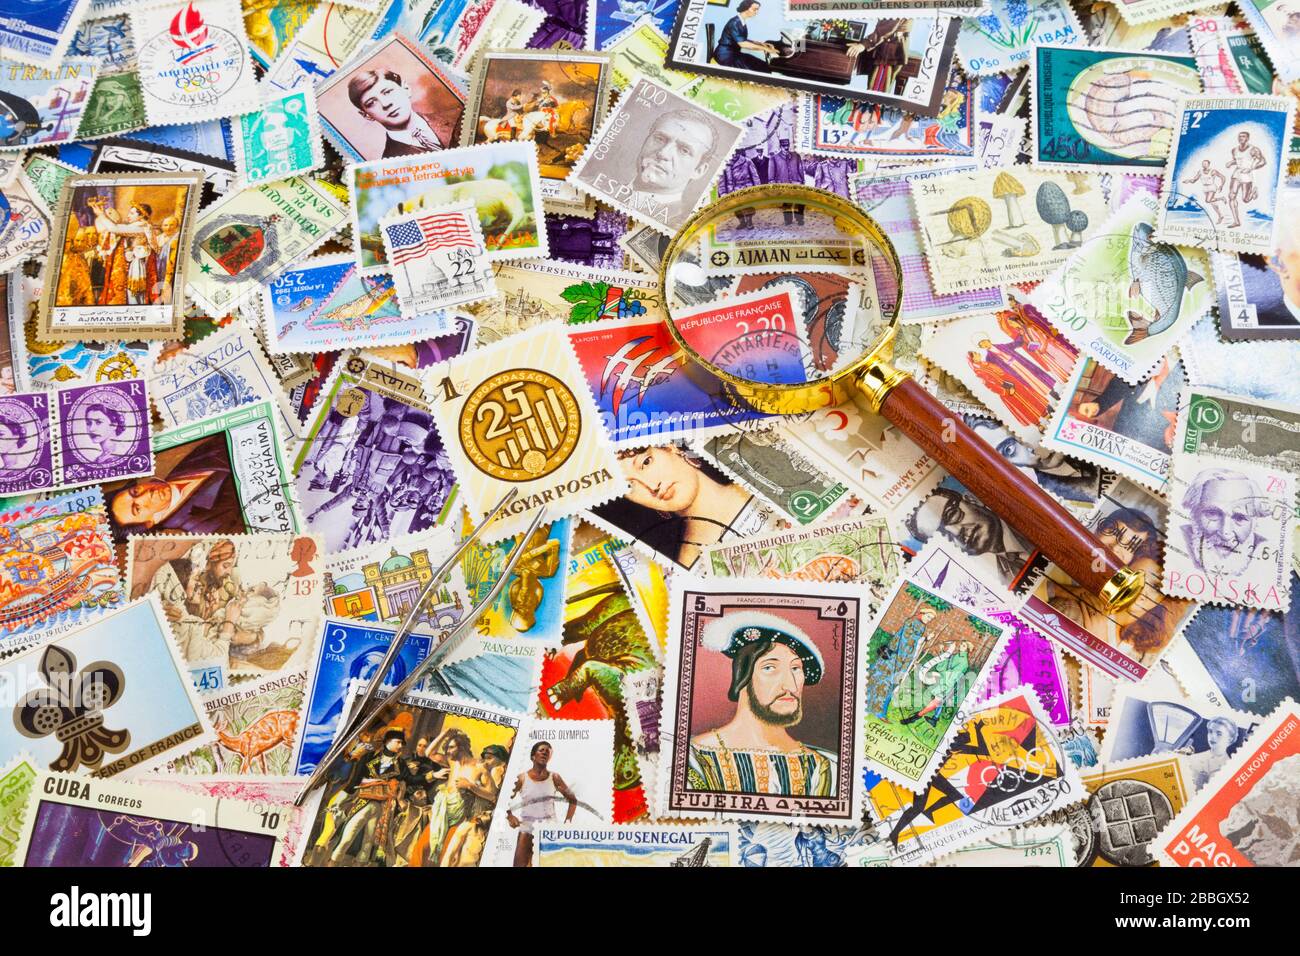 A magnifying glass and a stamp tongs on the top of a stack of worldwide stamps. Stock Photo